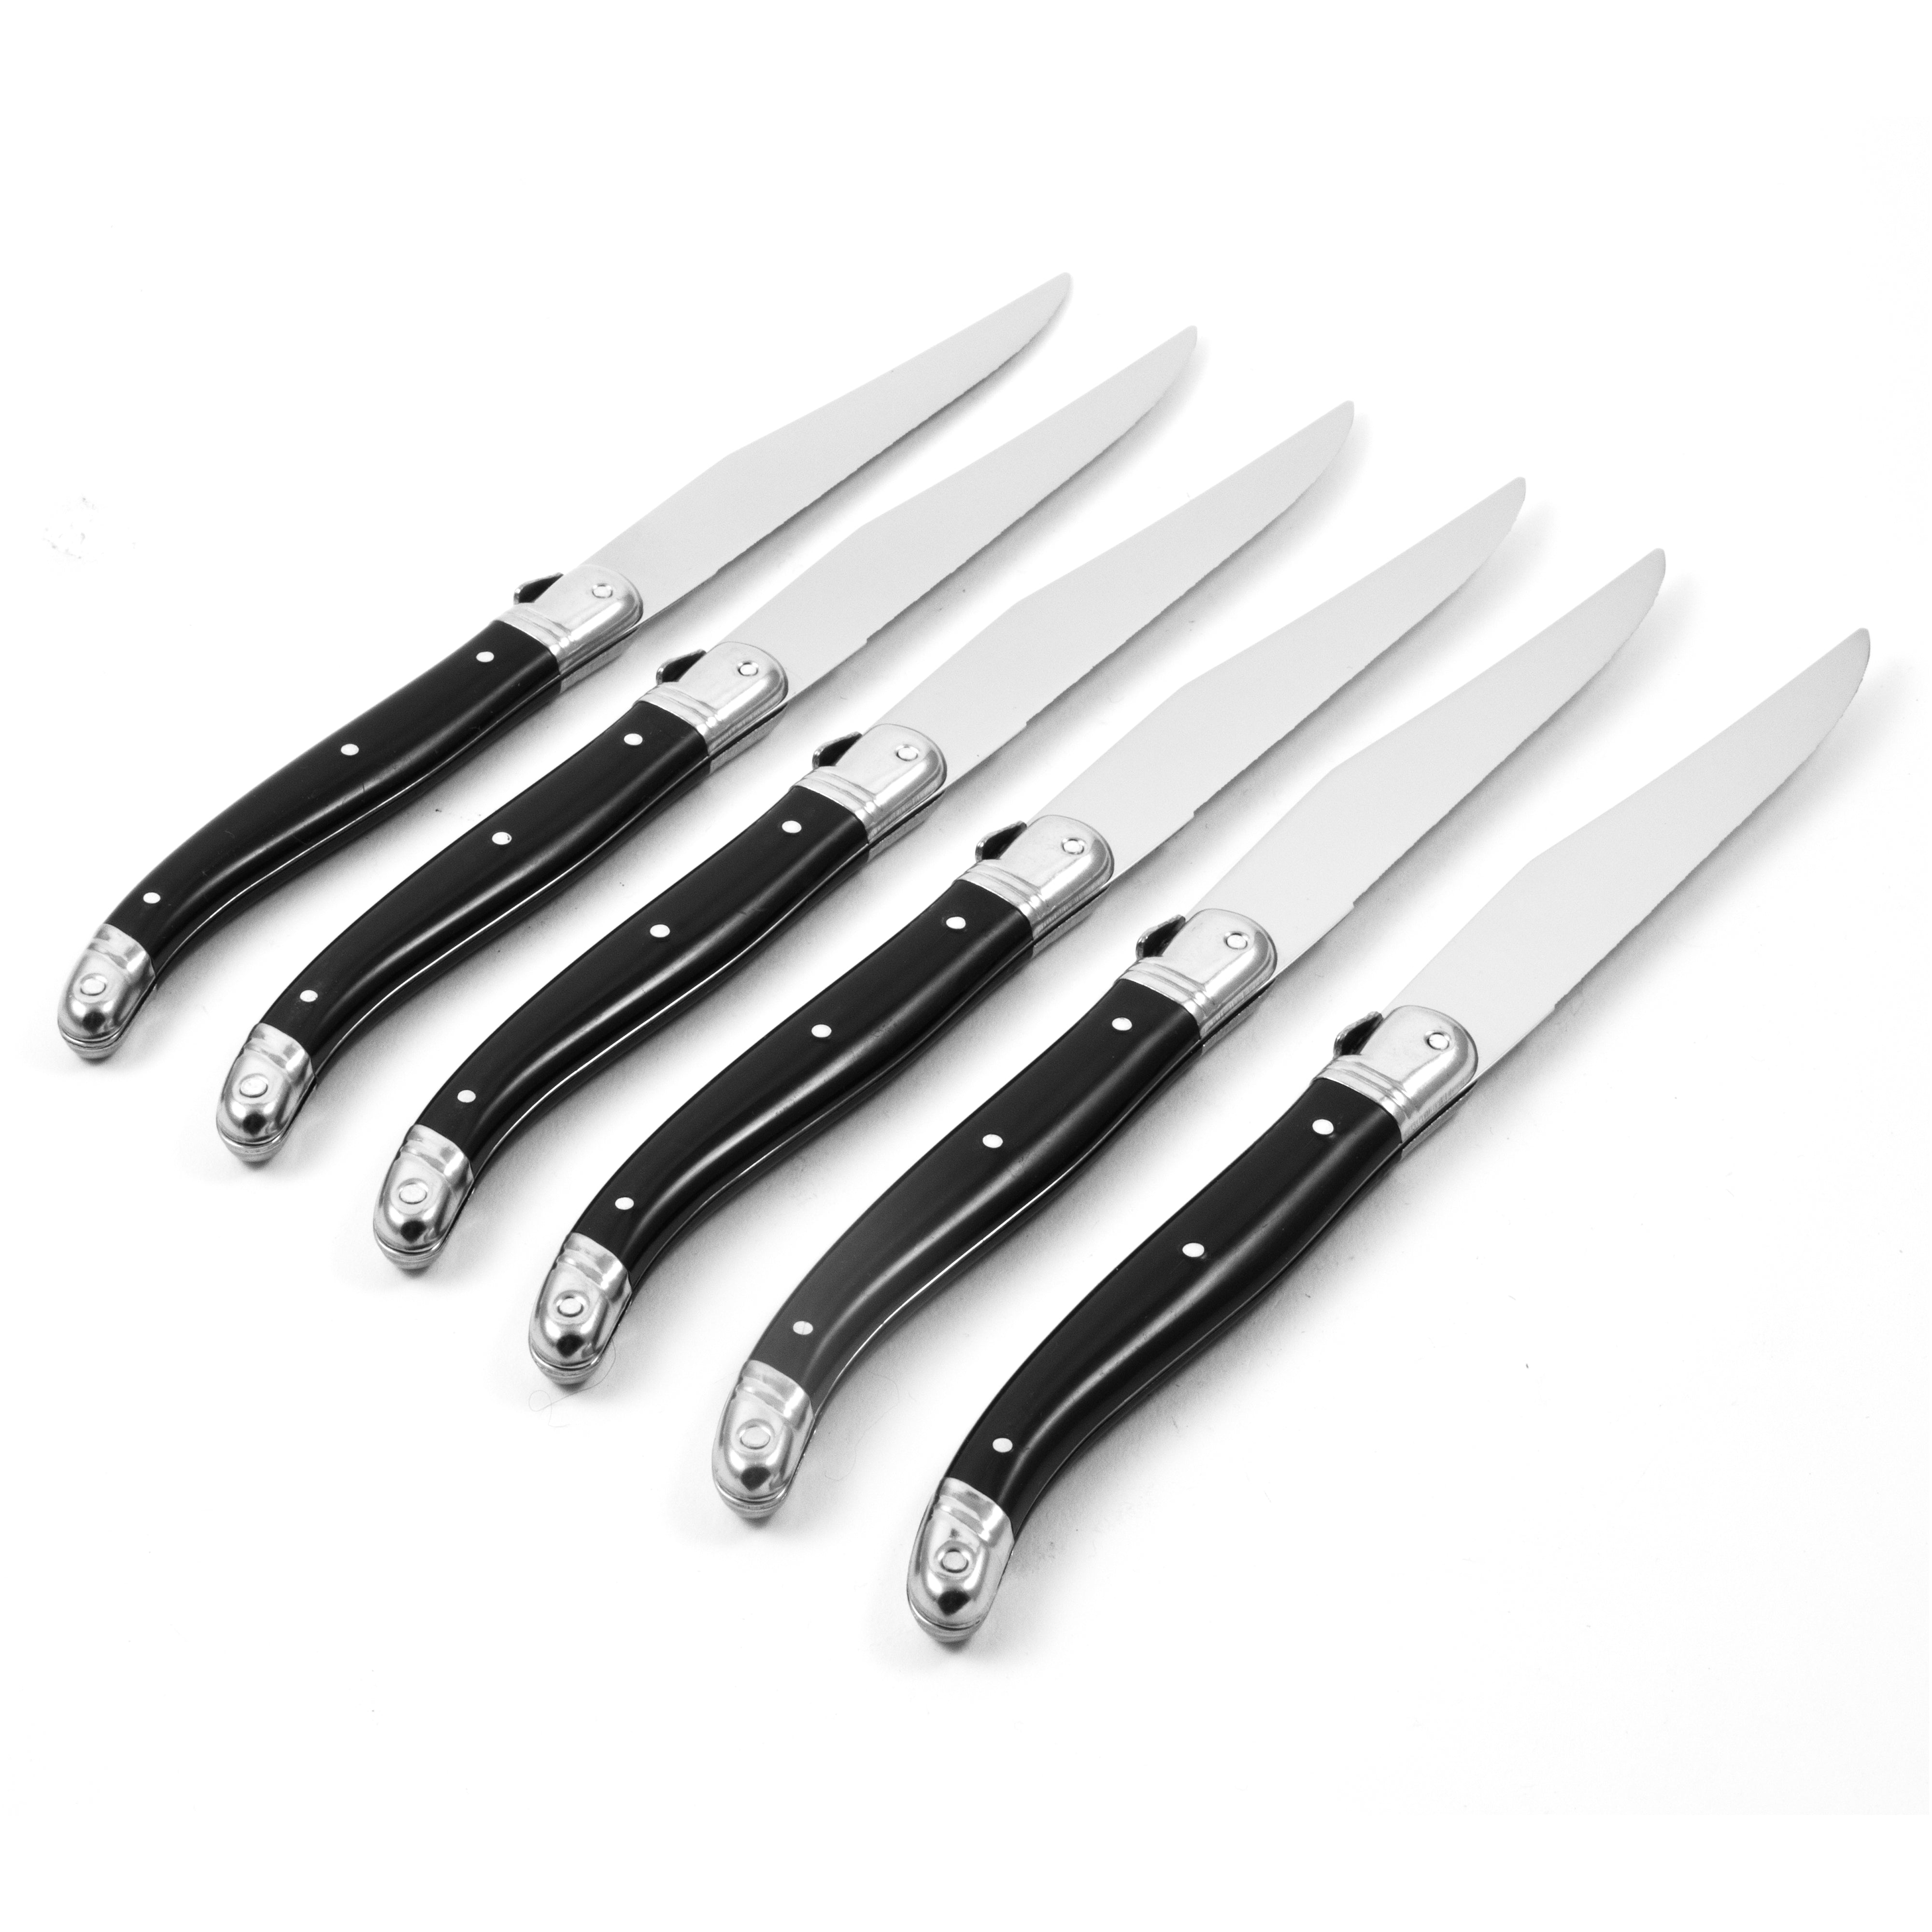 Laguiole Black Knives in Wooden Box with Acrylic Lid (Set of 6) Cutlery Laguiole Brand_Laguiole Kitchen_Dinnerware Kitchen_Kitchenware Knife Sets Laguiole Spring Collection Laguiole_Knives_S_6_-_Black_out_of_box